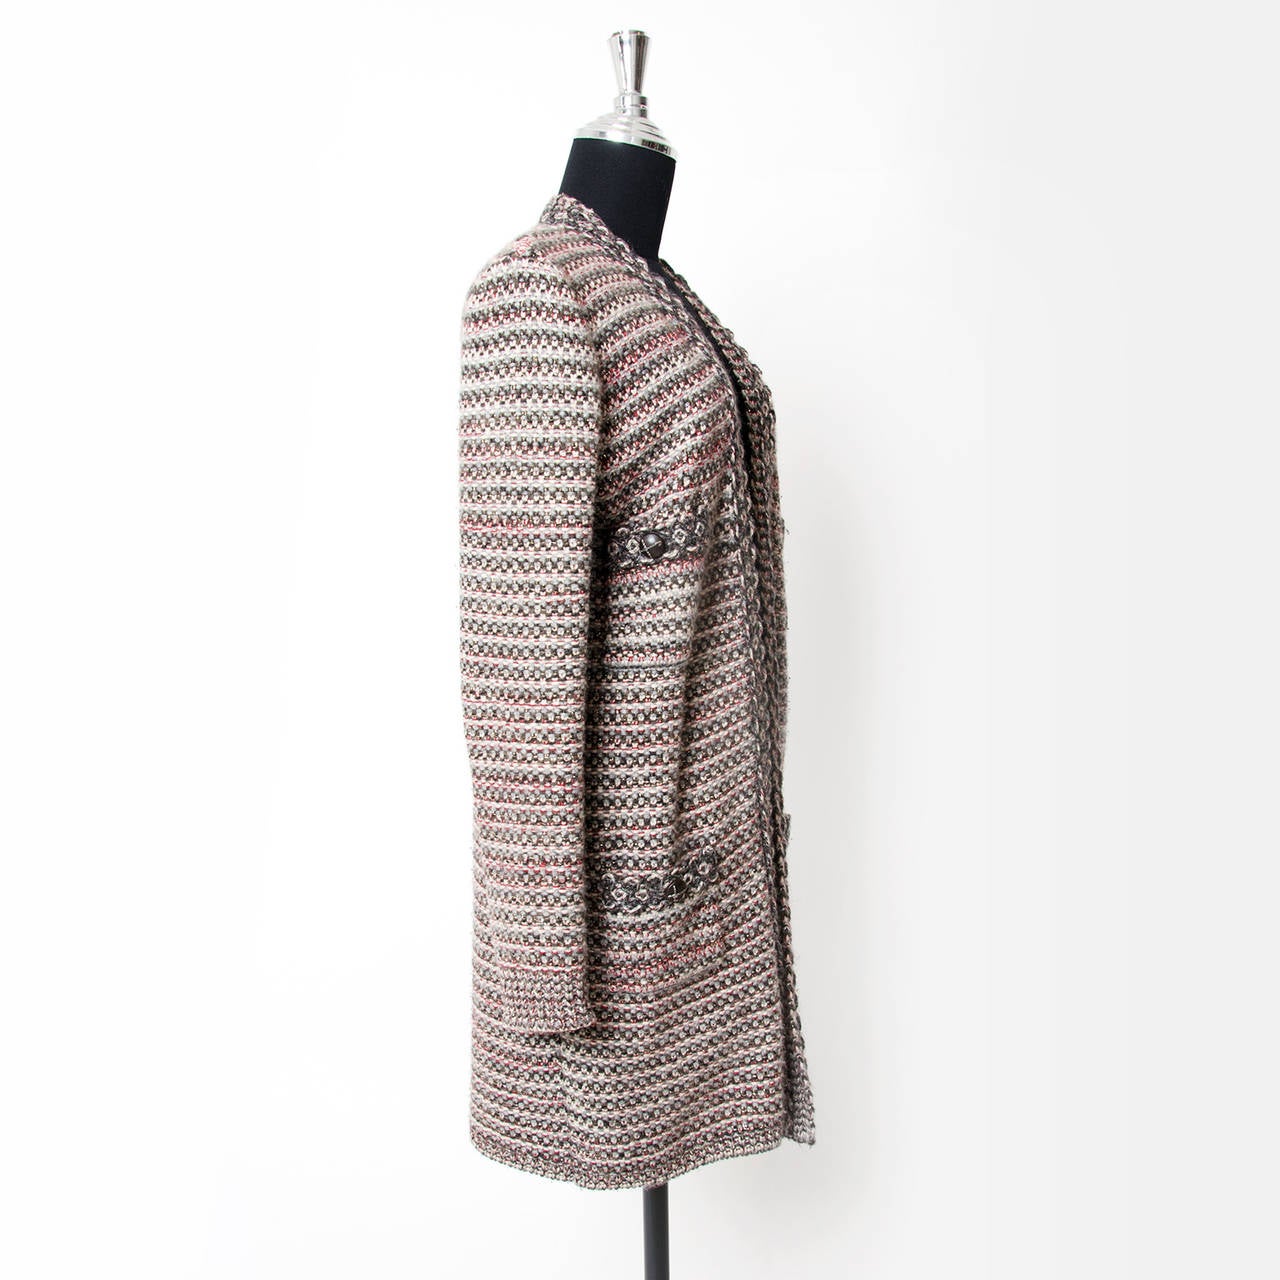 Long Chanel cardigan made form boucle wool. Muted red, grey and blue wool and a delicate gold metallic thread are woven to make the typical 'bouclé' pattern. 
The cardigan has an open front, no buttons or hooks.